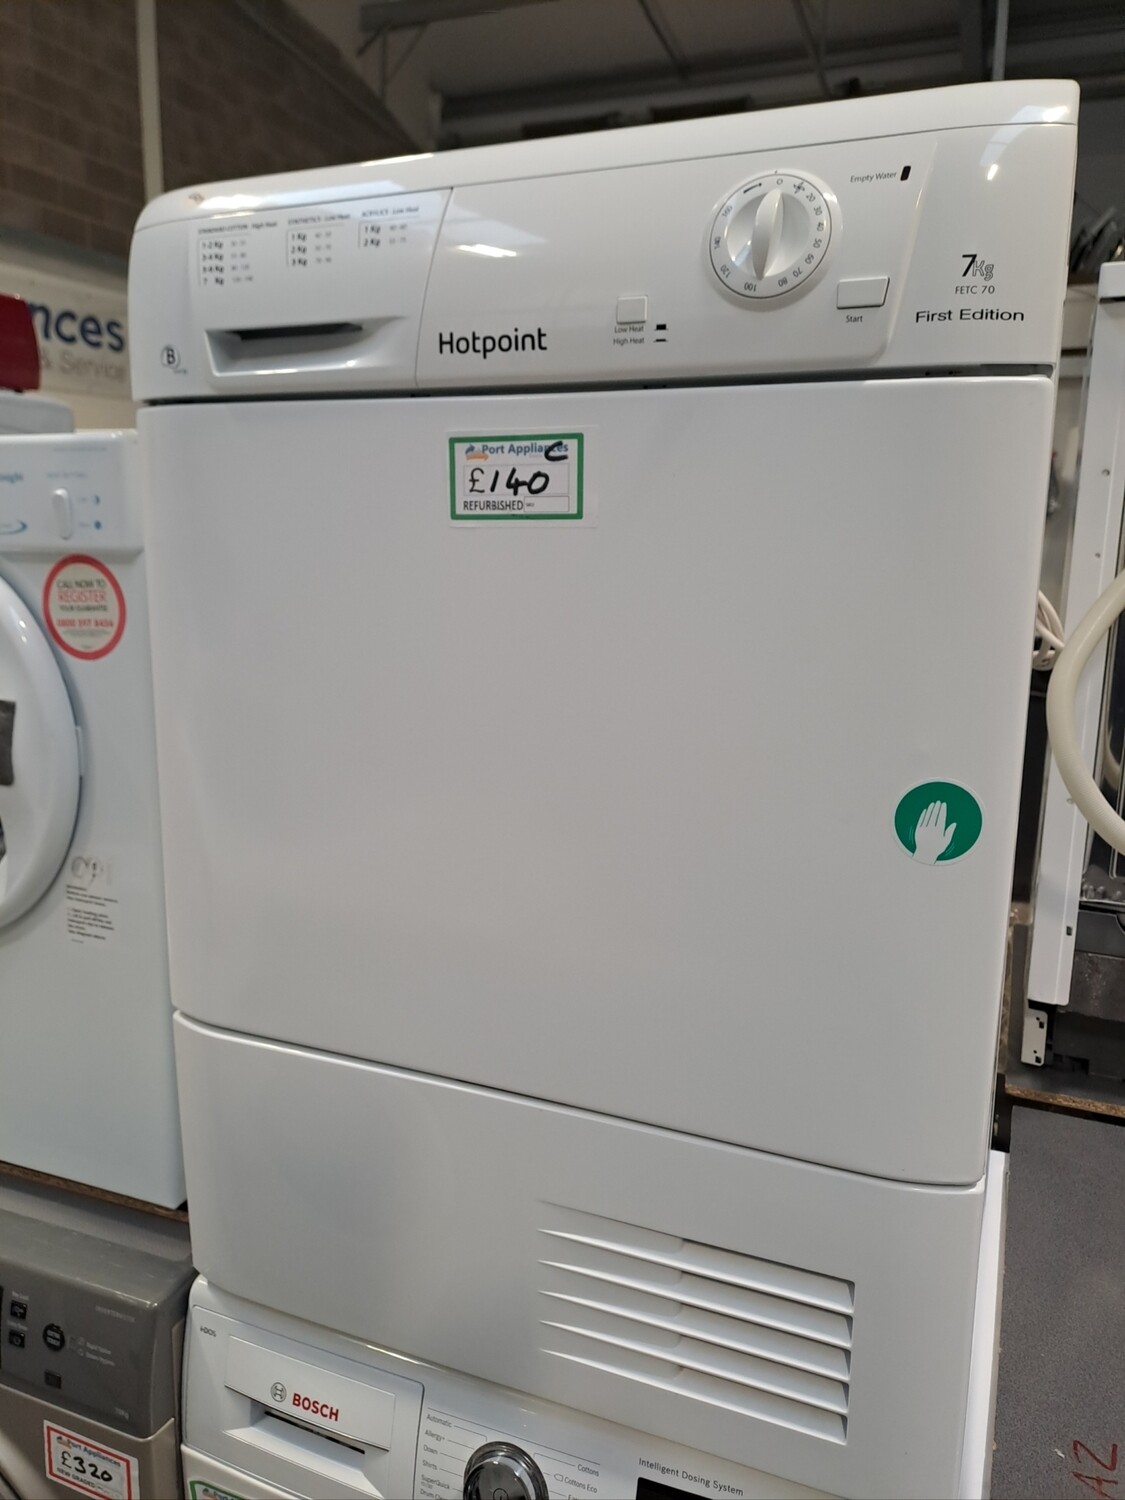 Hotpoint FETC70 7kg Condenser White H85 W60 D62 Refurbished 6 Months Guarantee. This item is located at our Whitby Road Shop